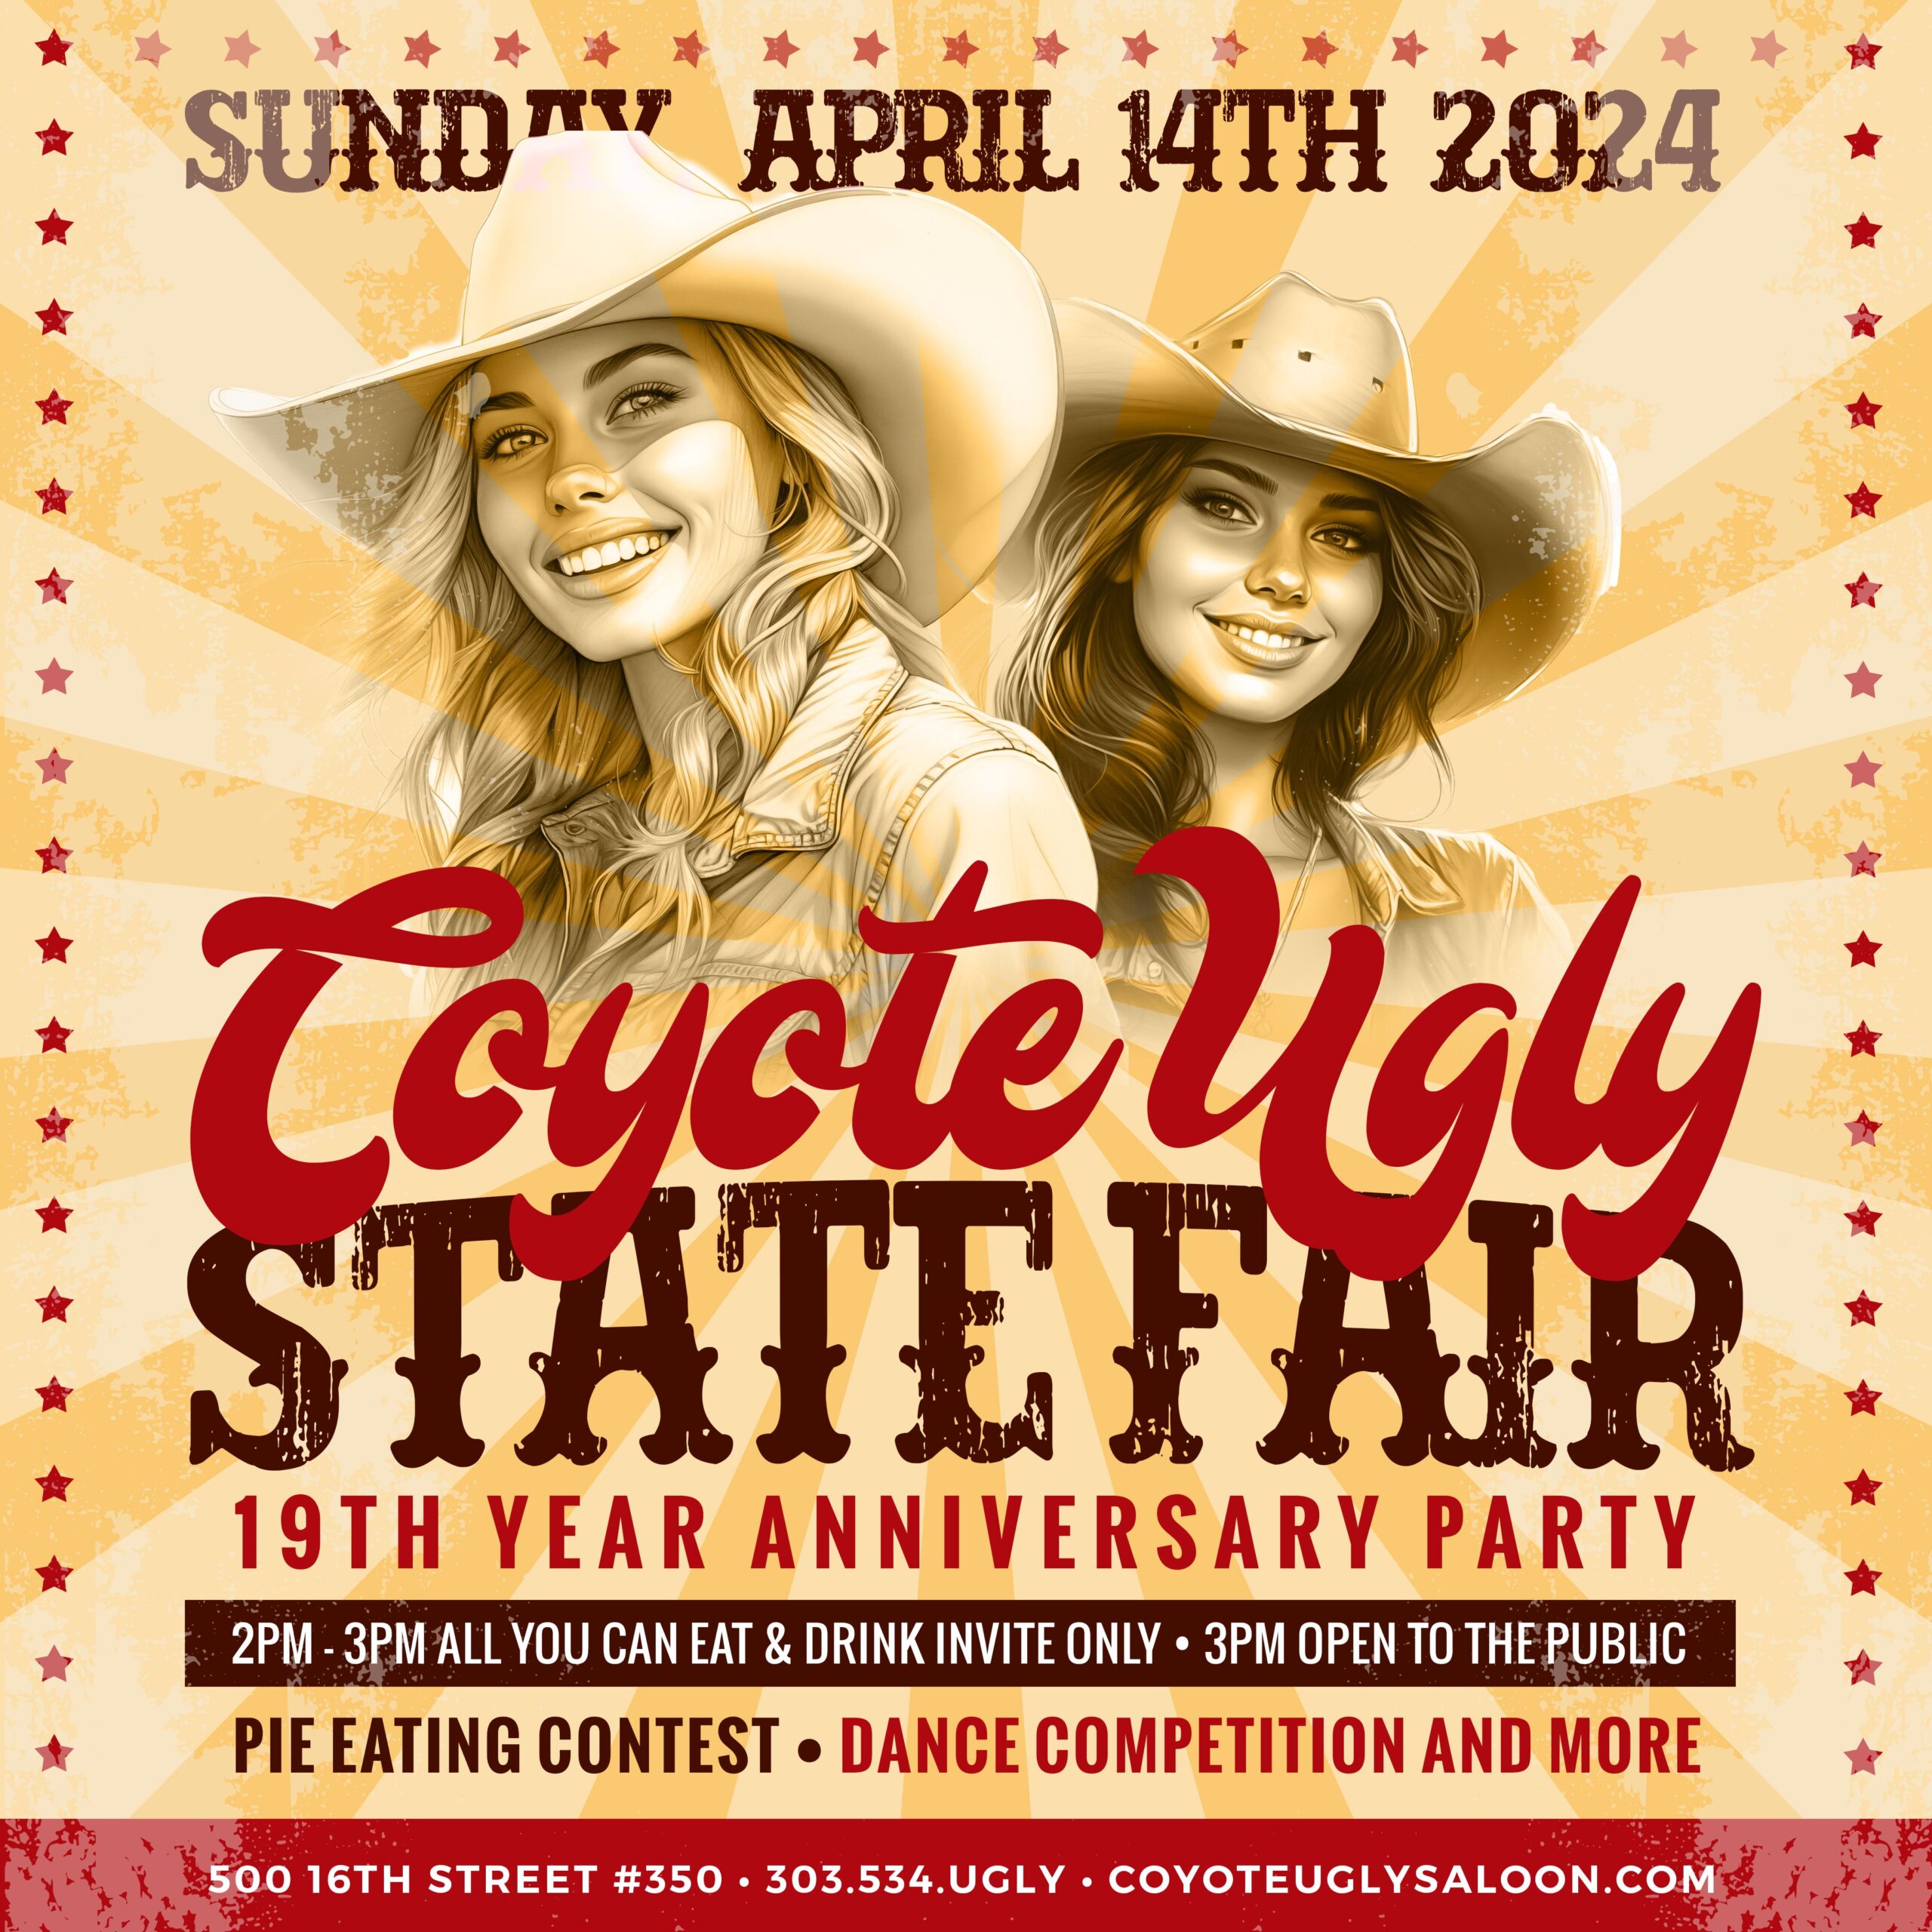 Denver: 19 Year Anniversary – Coyote Ugly State Fair: April 14, 2024